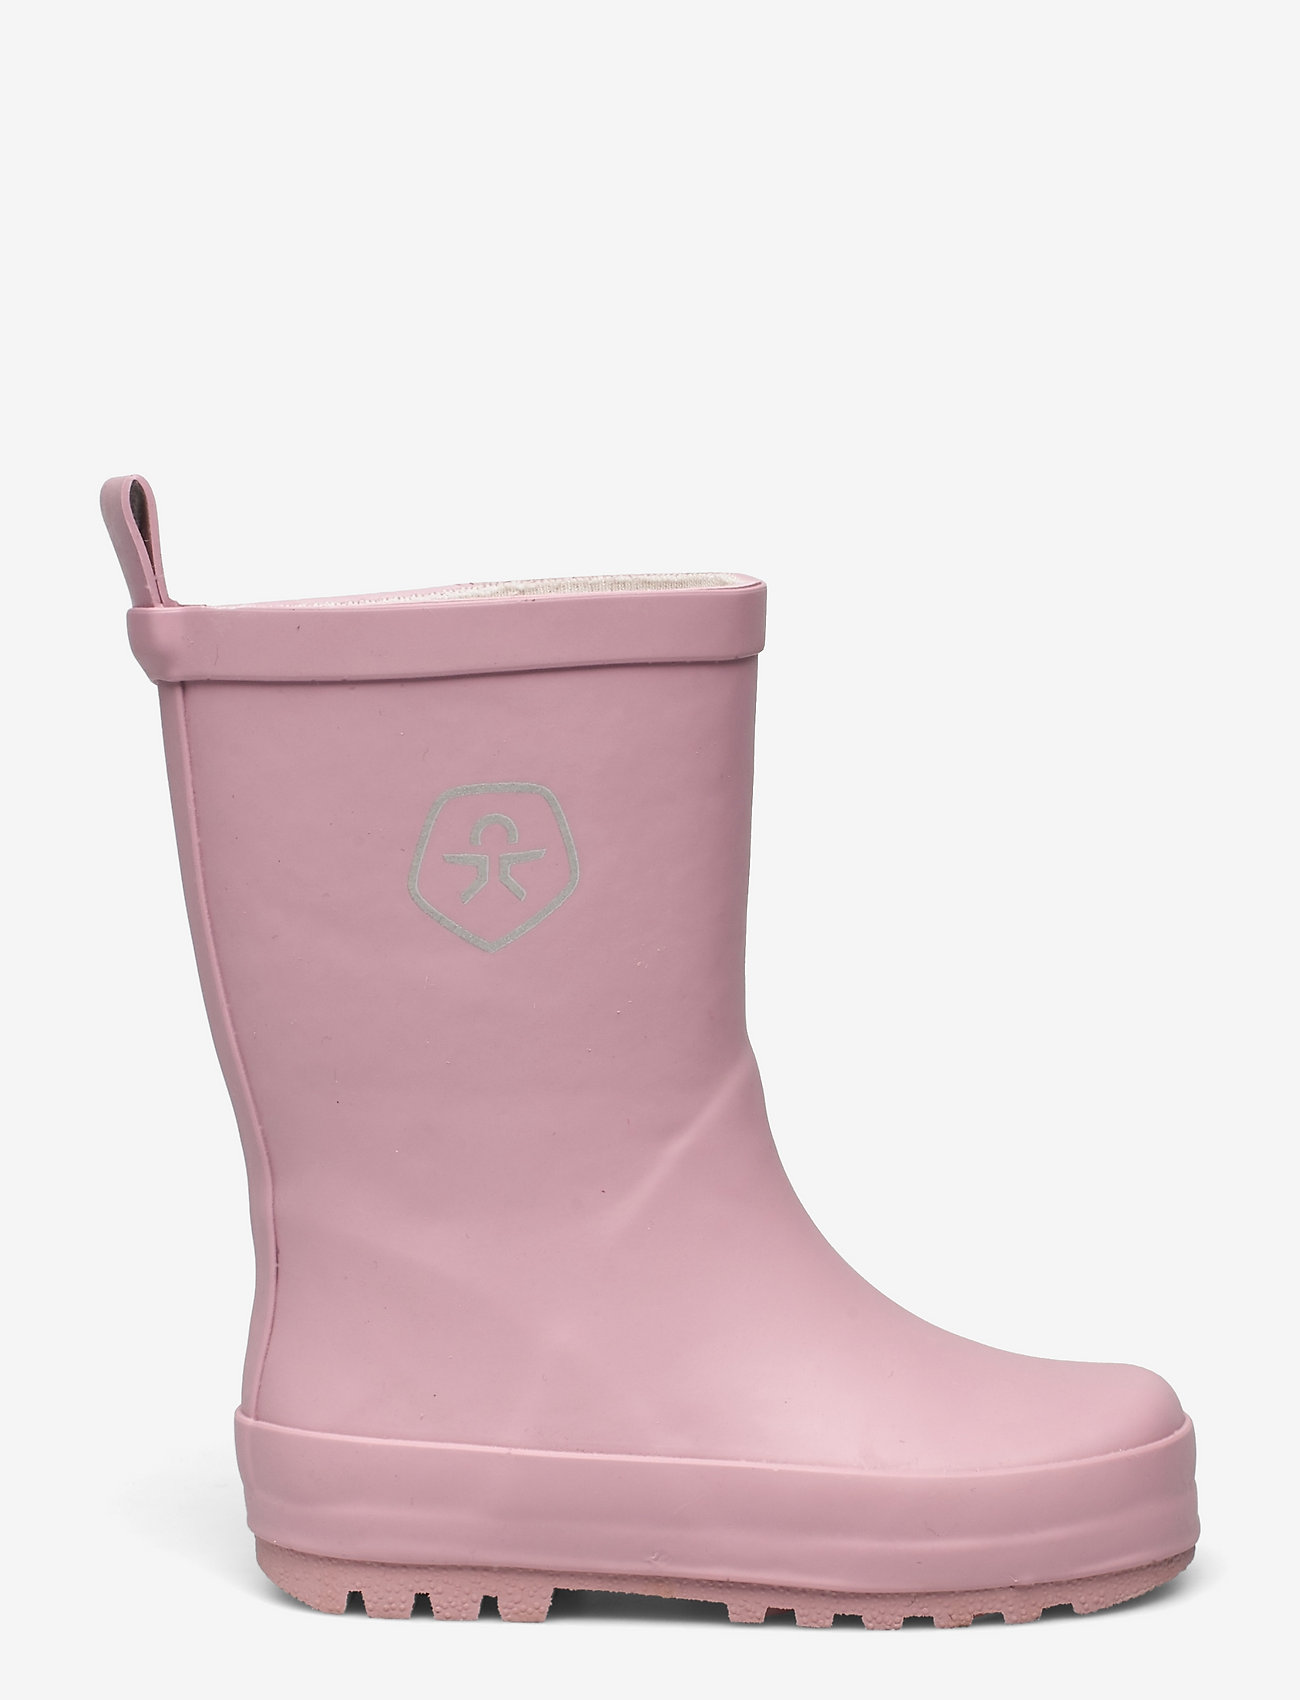 Color Kids - Wellies - unlined rubberboots - old rose - 1